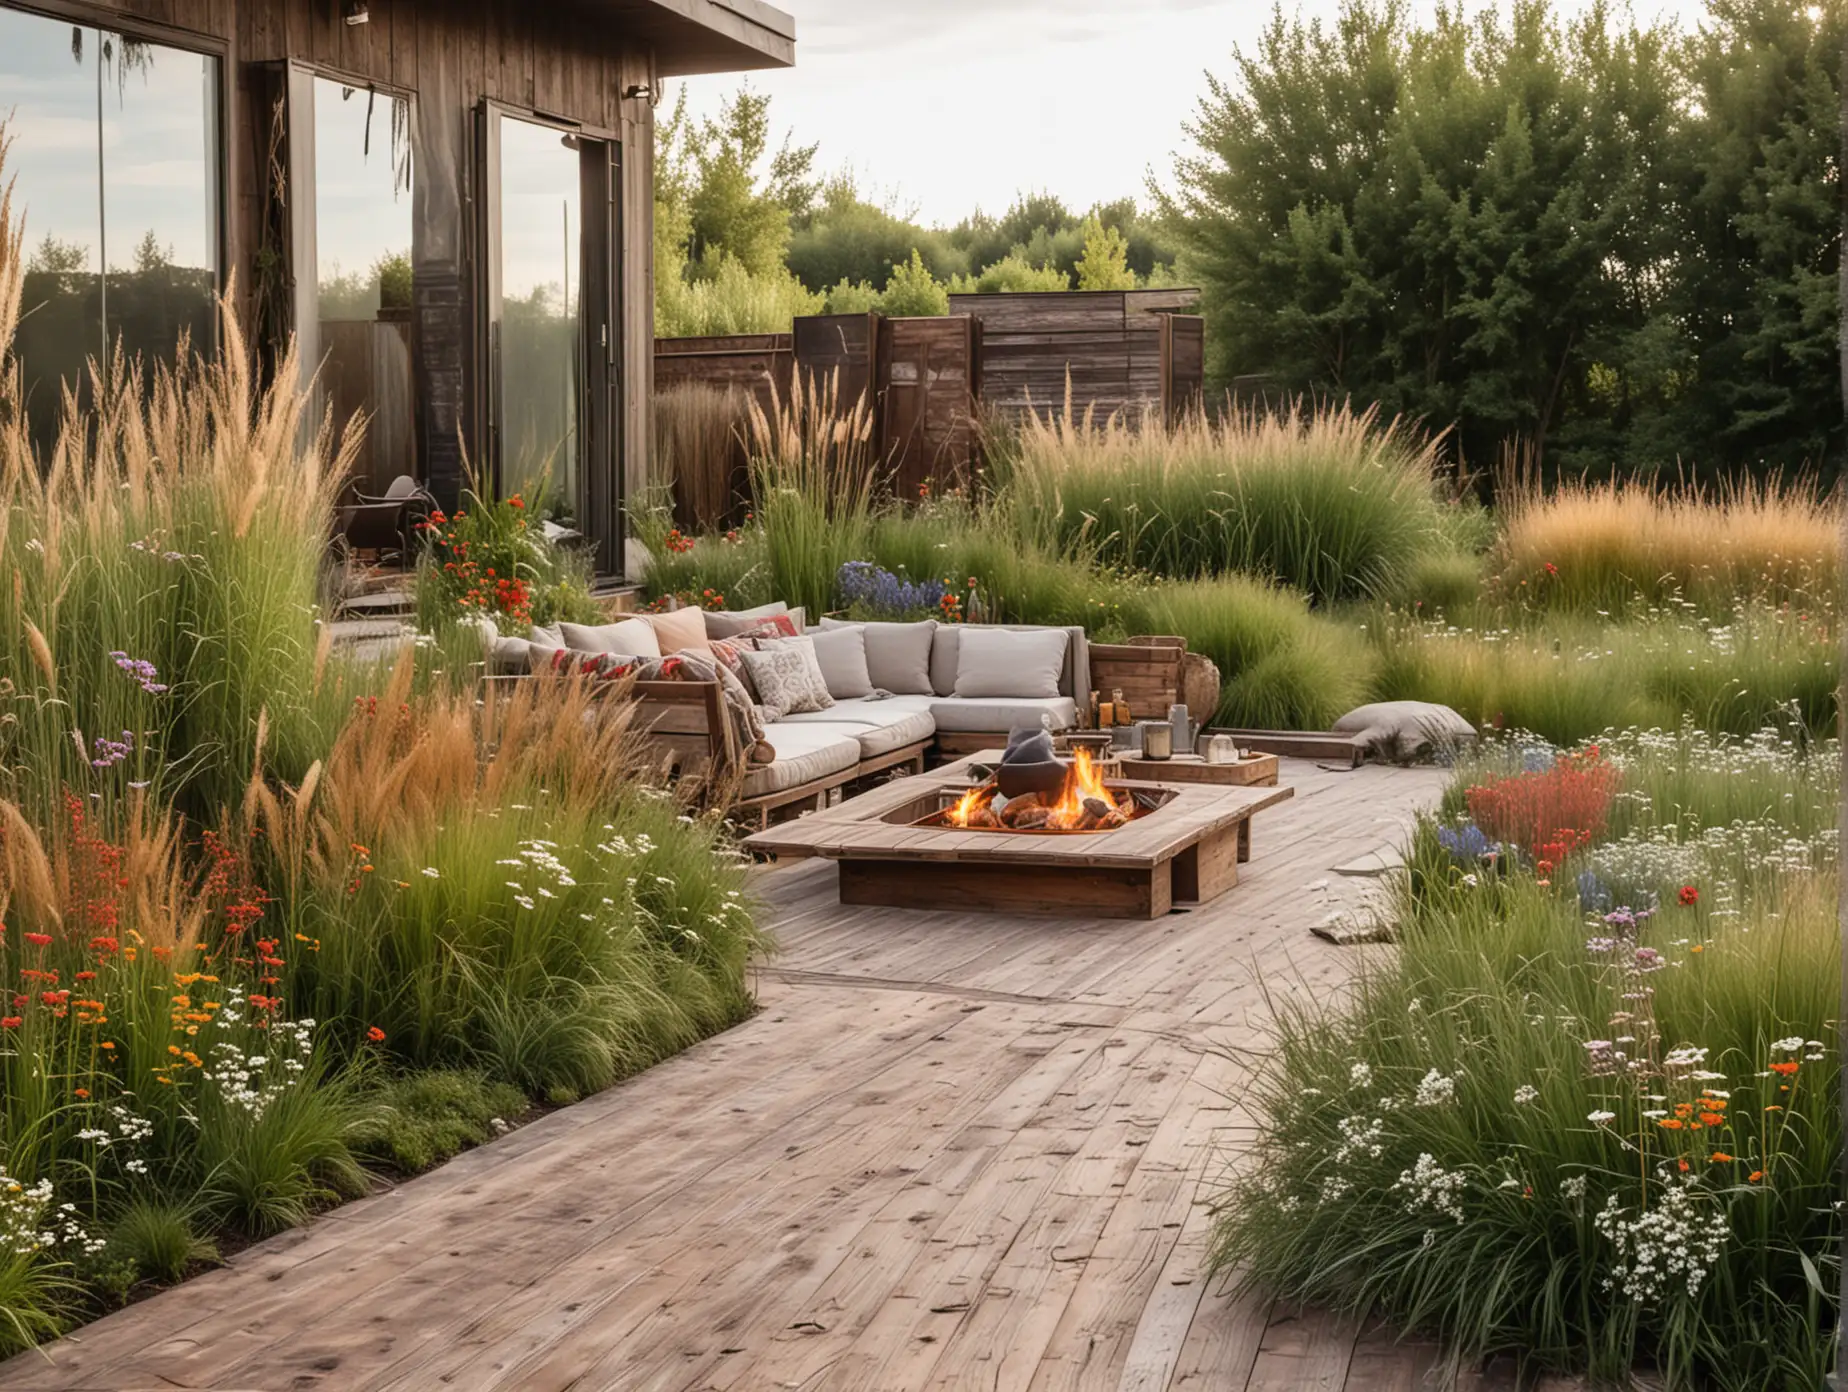 A wide shot of a rustic patio with a wooden deck, large outdoor sofa, and an open fire pit. The patio is surrounded by tall grasses and wildflowers, creating a natural, untamed look in front of a container house